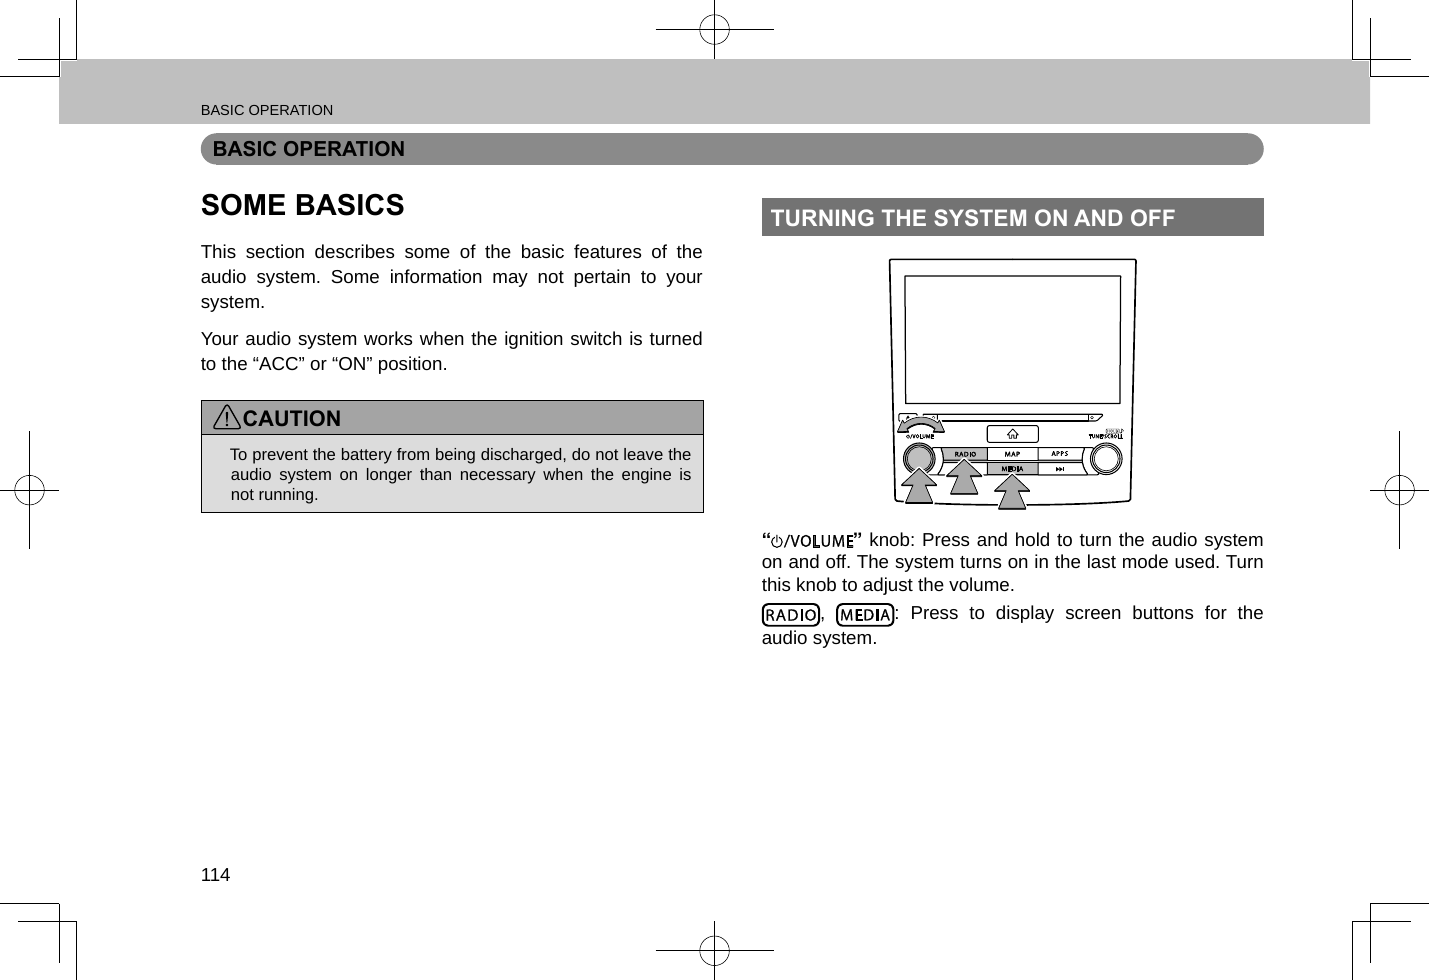 BASIC OPERATION114BASIC OPERATIONSOME BASICSThis section describes some of the basic features of the audio system. Some information may not pertain to your system.Your audio system works when the ignition switch is turned to the “ACC” or “ON” position.CAUTION lTo prevent the battery from being discharged, do not leave the audio system on longer than necessary when the engine is not running.TURNING THE SYSTEM ON AND OFF“ ” knob: Press and hold to turn the audio system on and off. The system turns on in the last mode used. Turn this knob to adjust the volume.,  : Press to display screen buttons for the audio system.